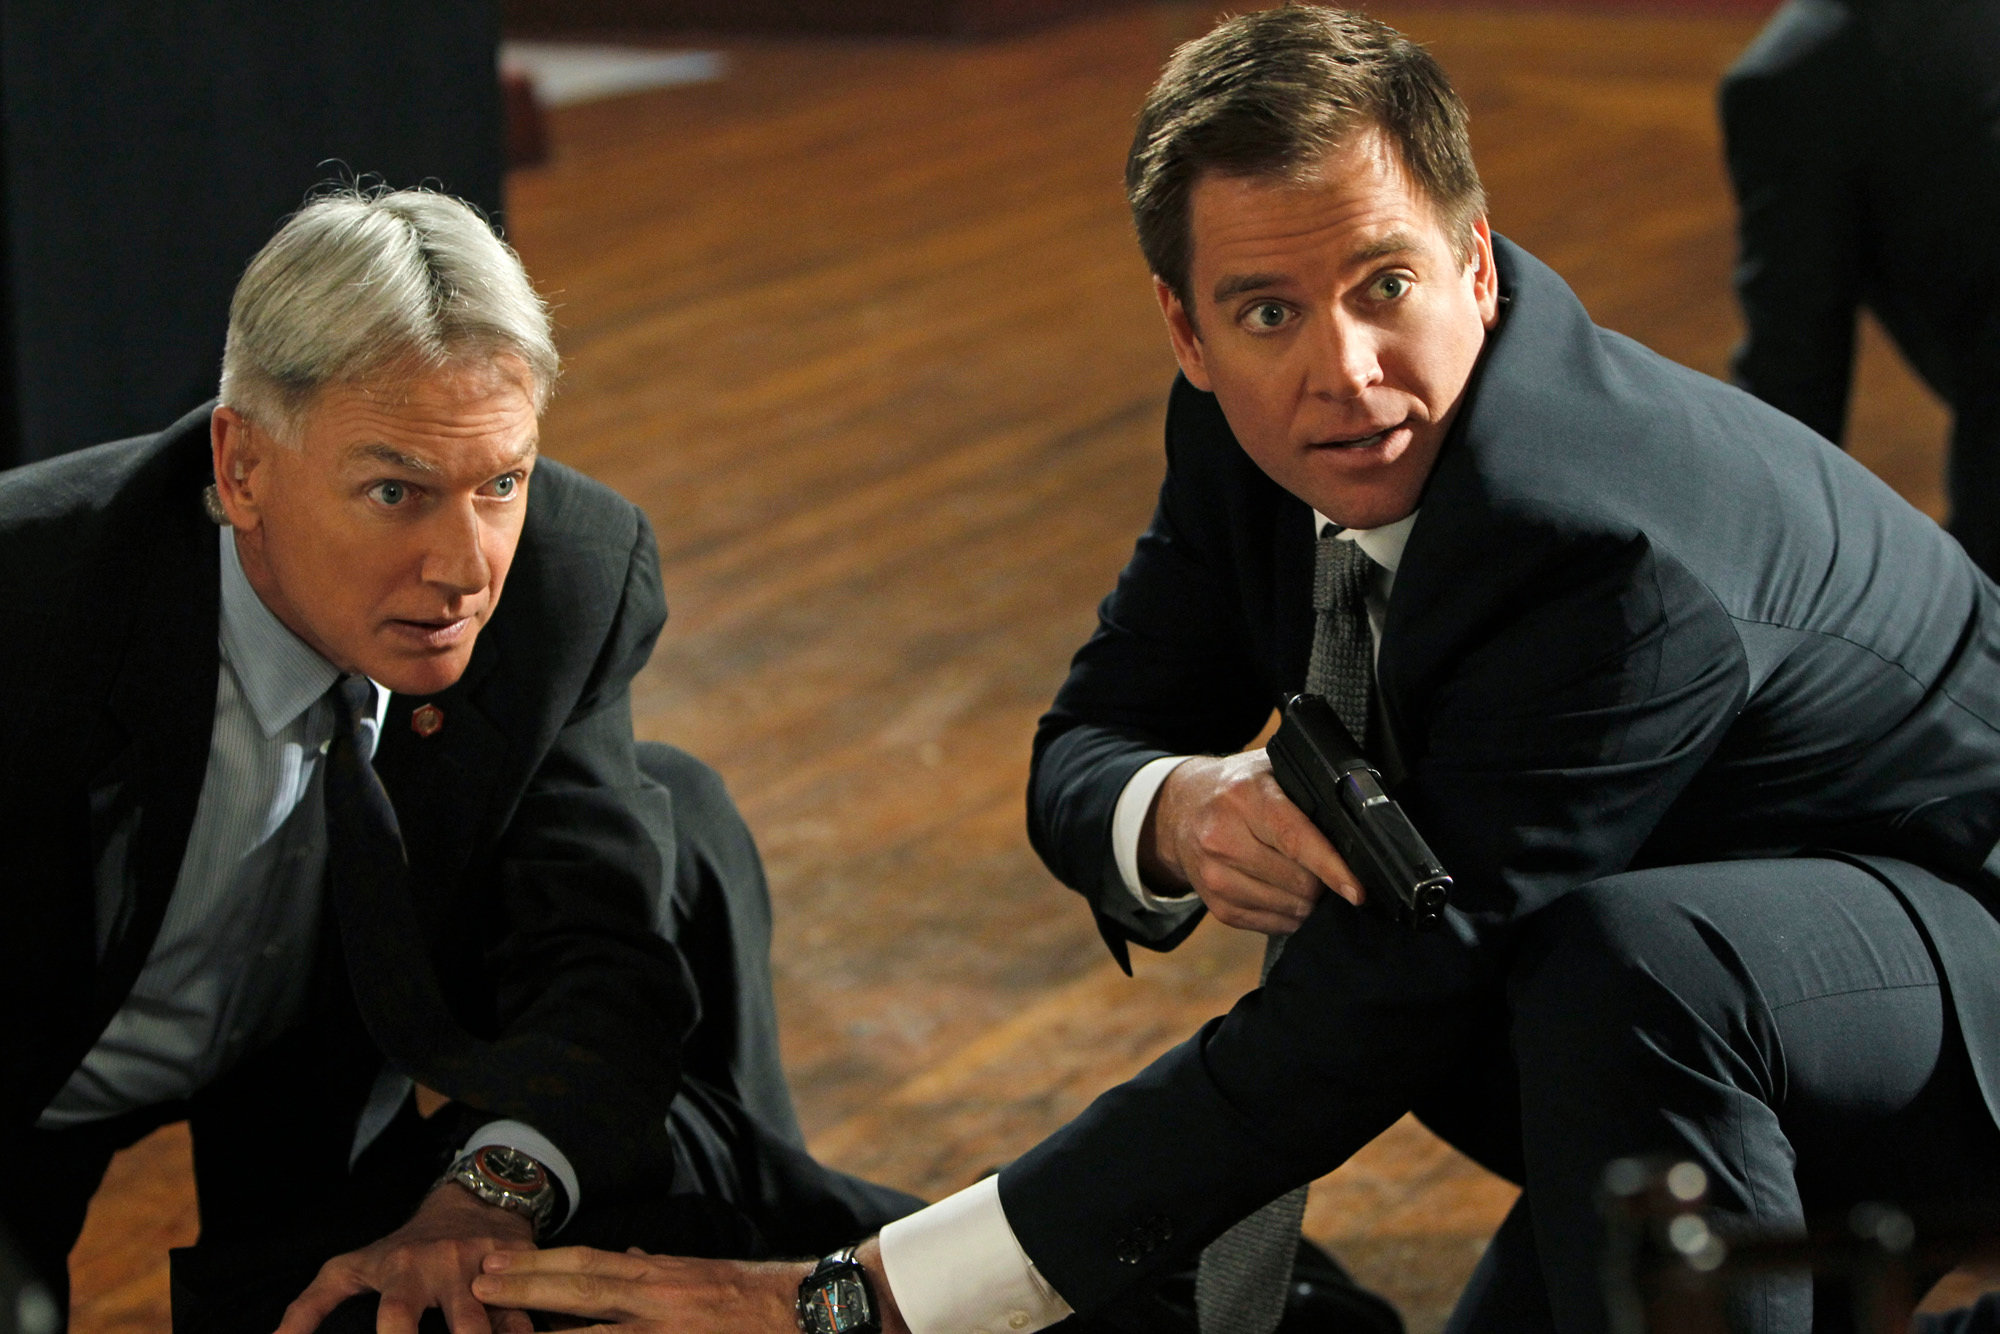 Michael Weatherly Teases Fans with a Potential Return to NCIS What's Next for Tony DiNozzo